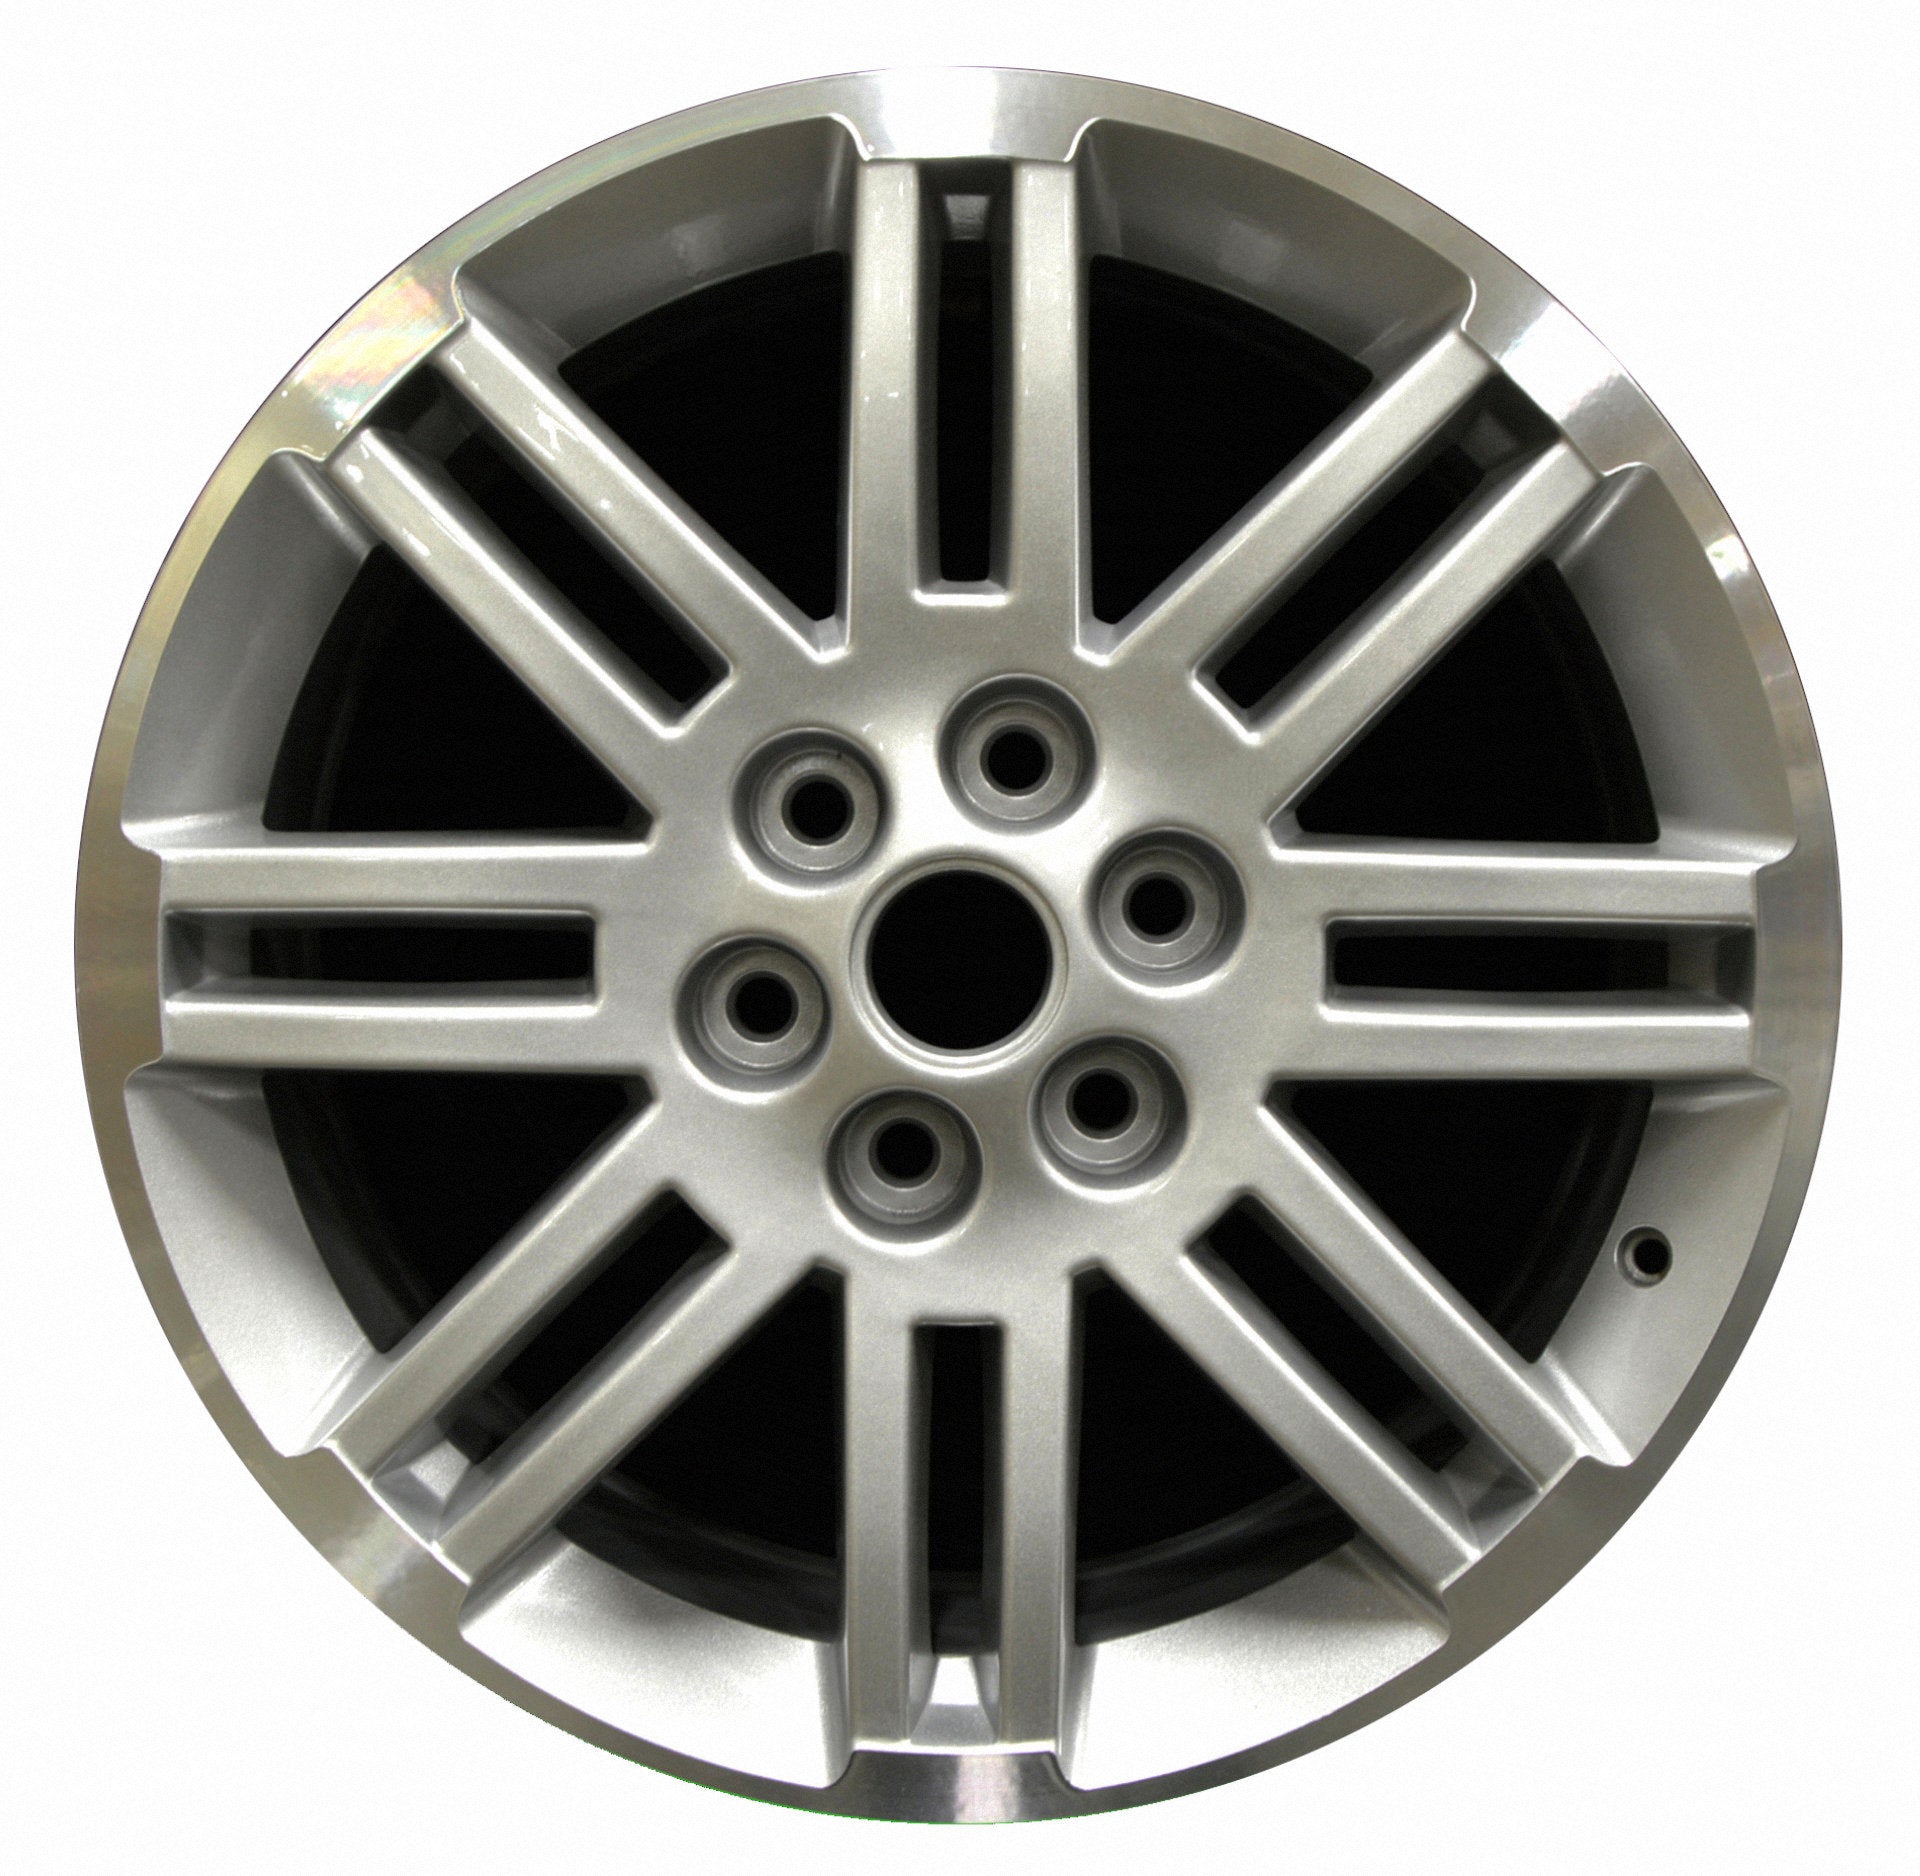 Buick Enclave  2009, 2010, 2011 Factory OEM Car Wheel Size 20x7.5 Alloy WAO.7063.PS02.FC